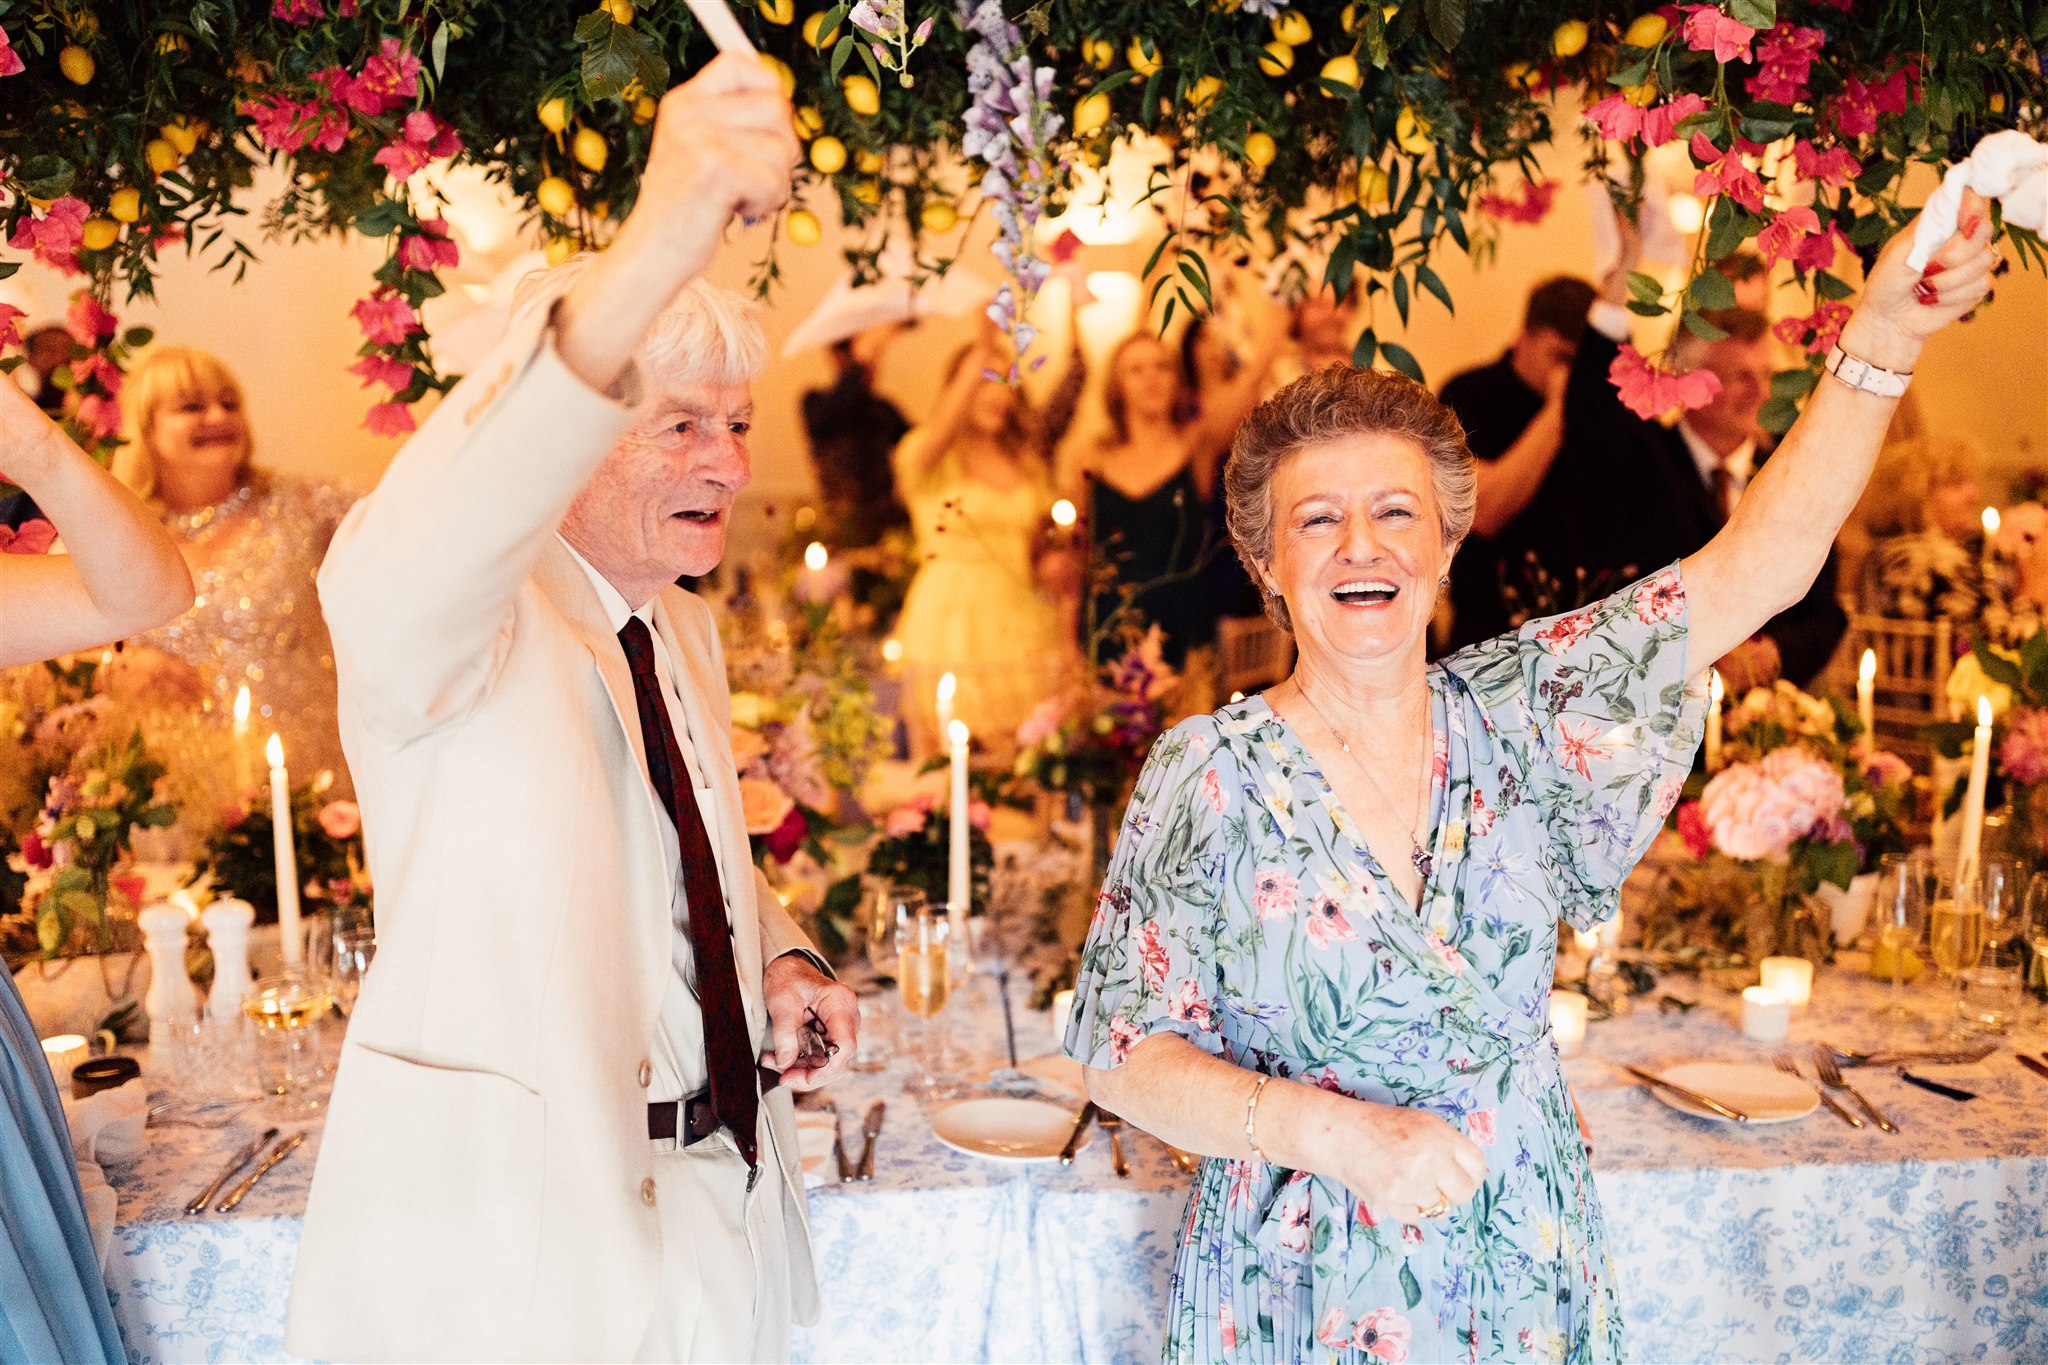 A middle aged lady wearing a floral dress stands waving a napkin and smiling next to an elderly man wearing a beige suit. They are celebrating at a wedding